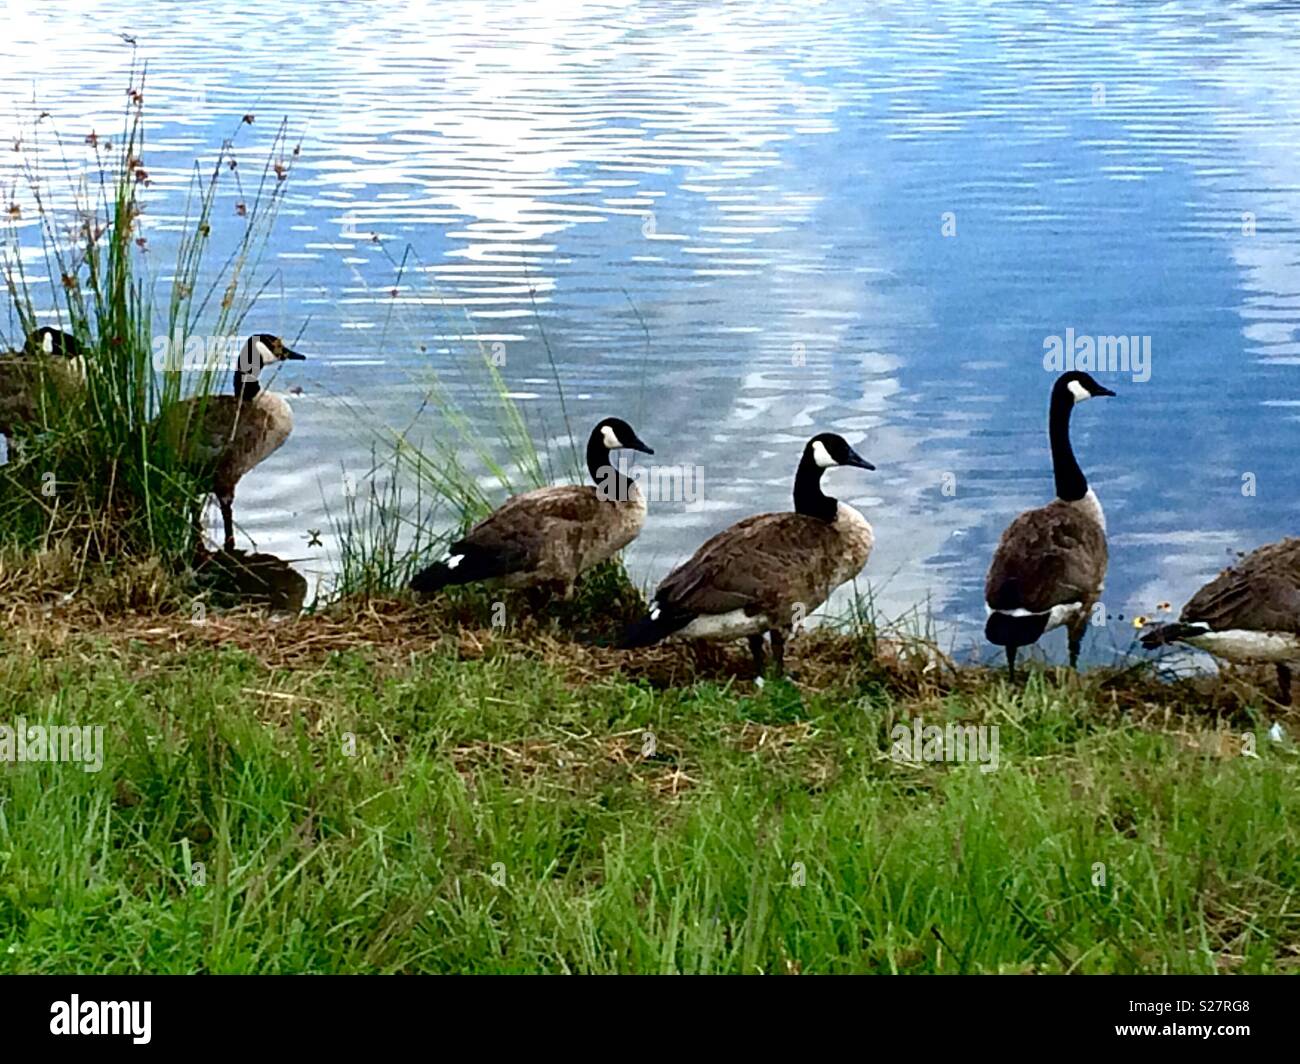 These beautiful geese hang out at the muldrow ponds every year. It's such a great place to go fishing or just for photo taking. Stock Photo